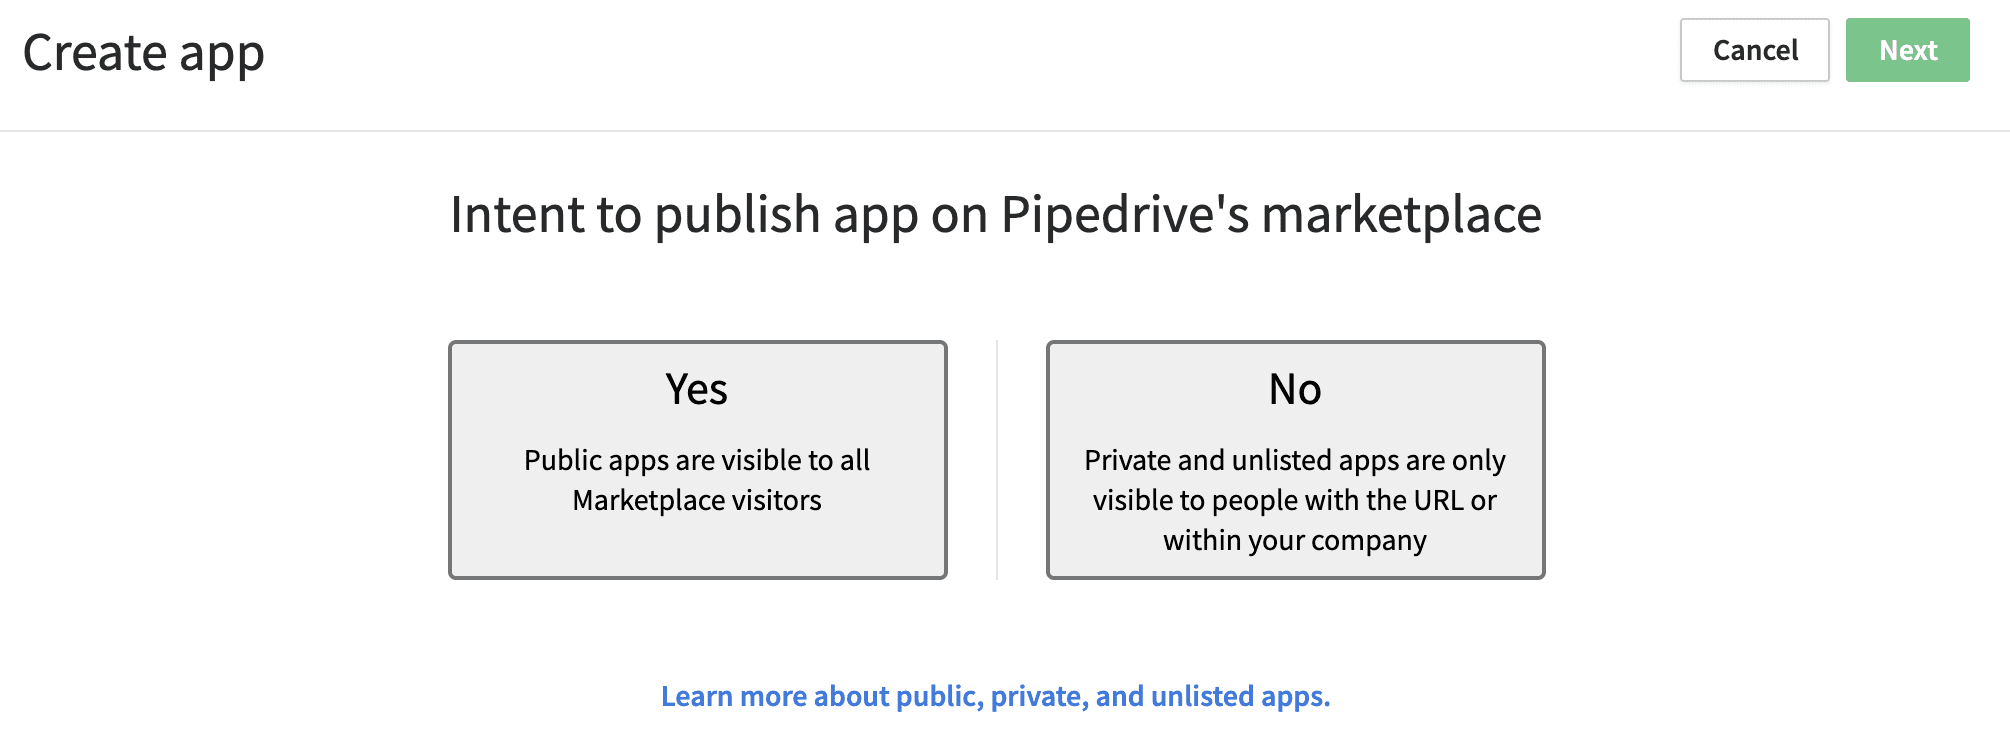 The "Intent to publish app on Pipedrive's Marketplace" screen